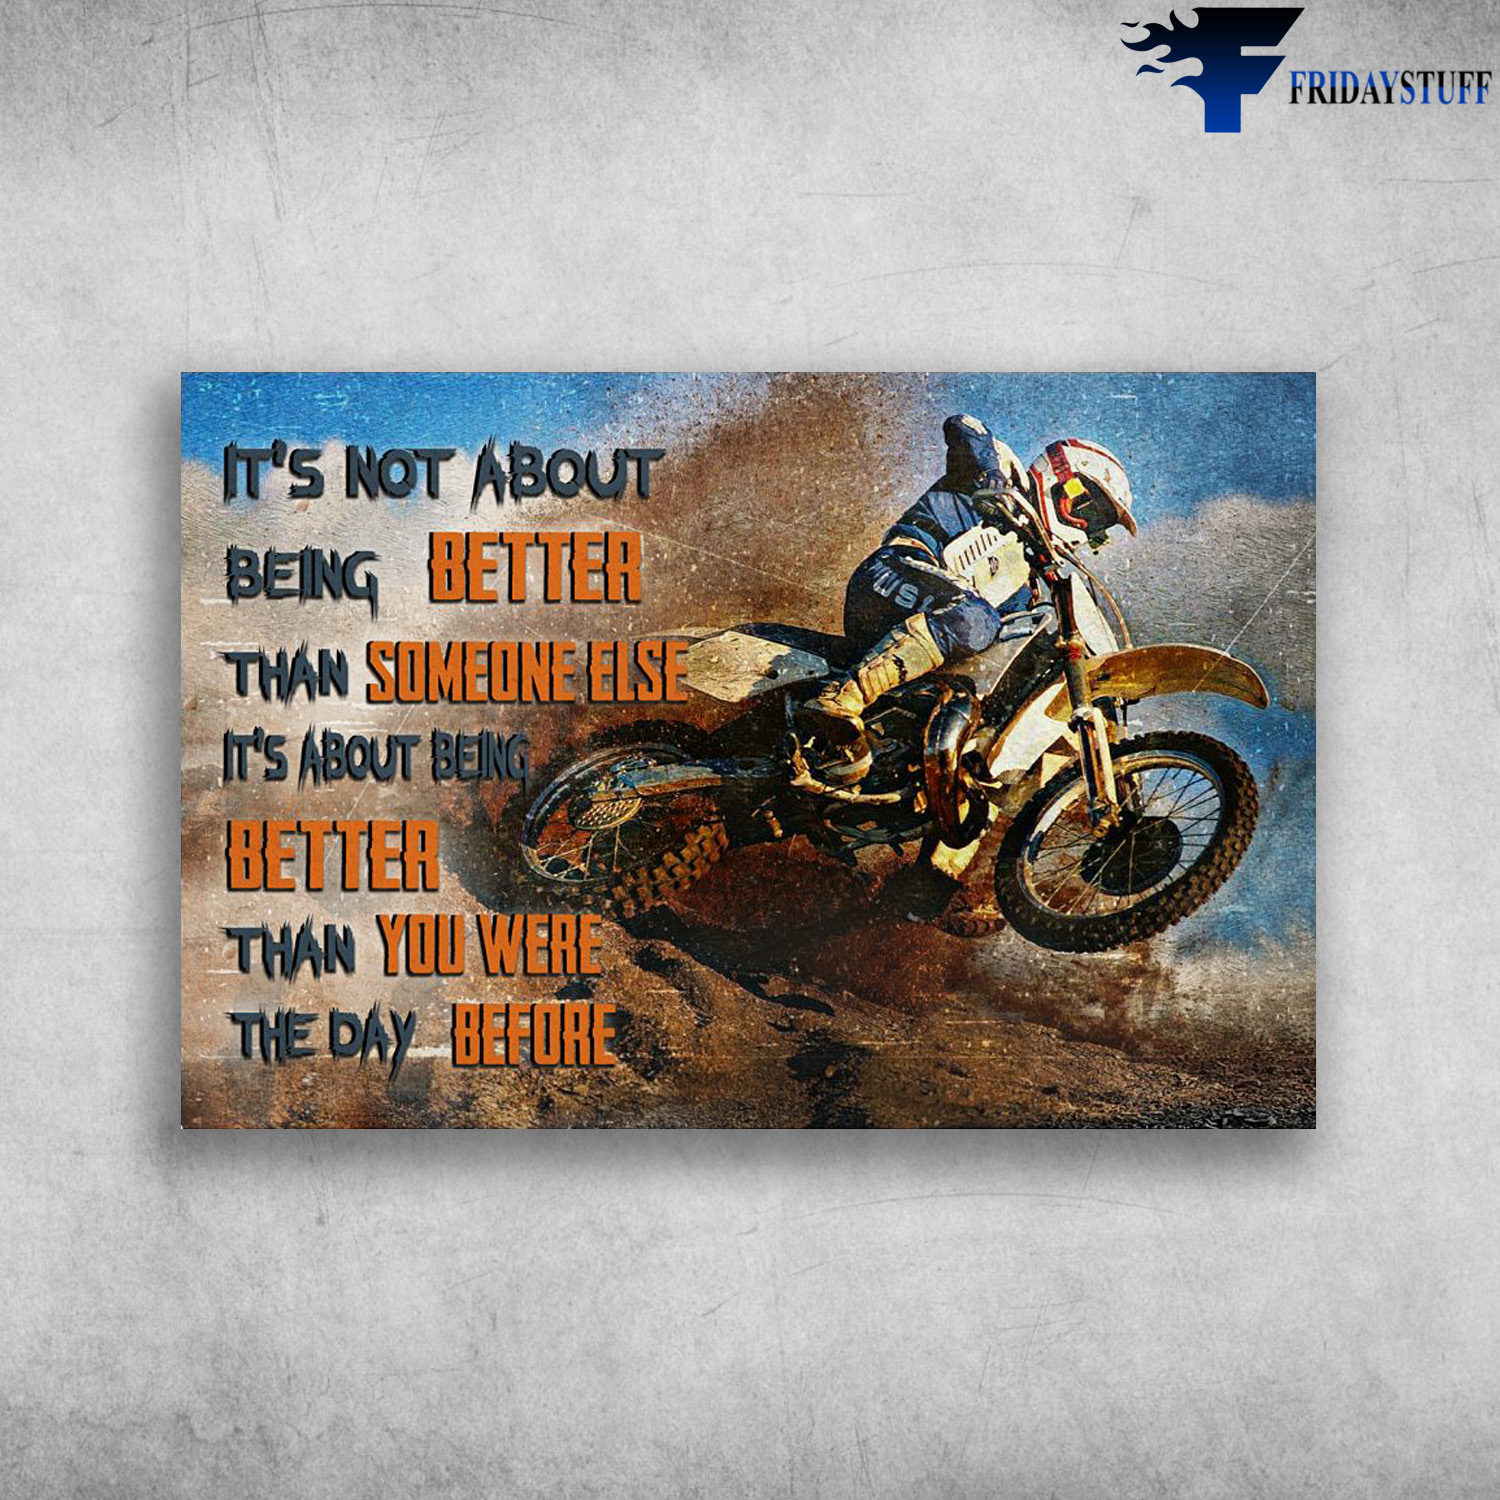 Motocross Biker - It's Not About Being Better Than Someone Else, It's About Being Better Than Yu Were The Day Before